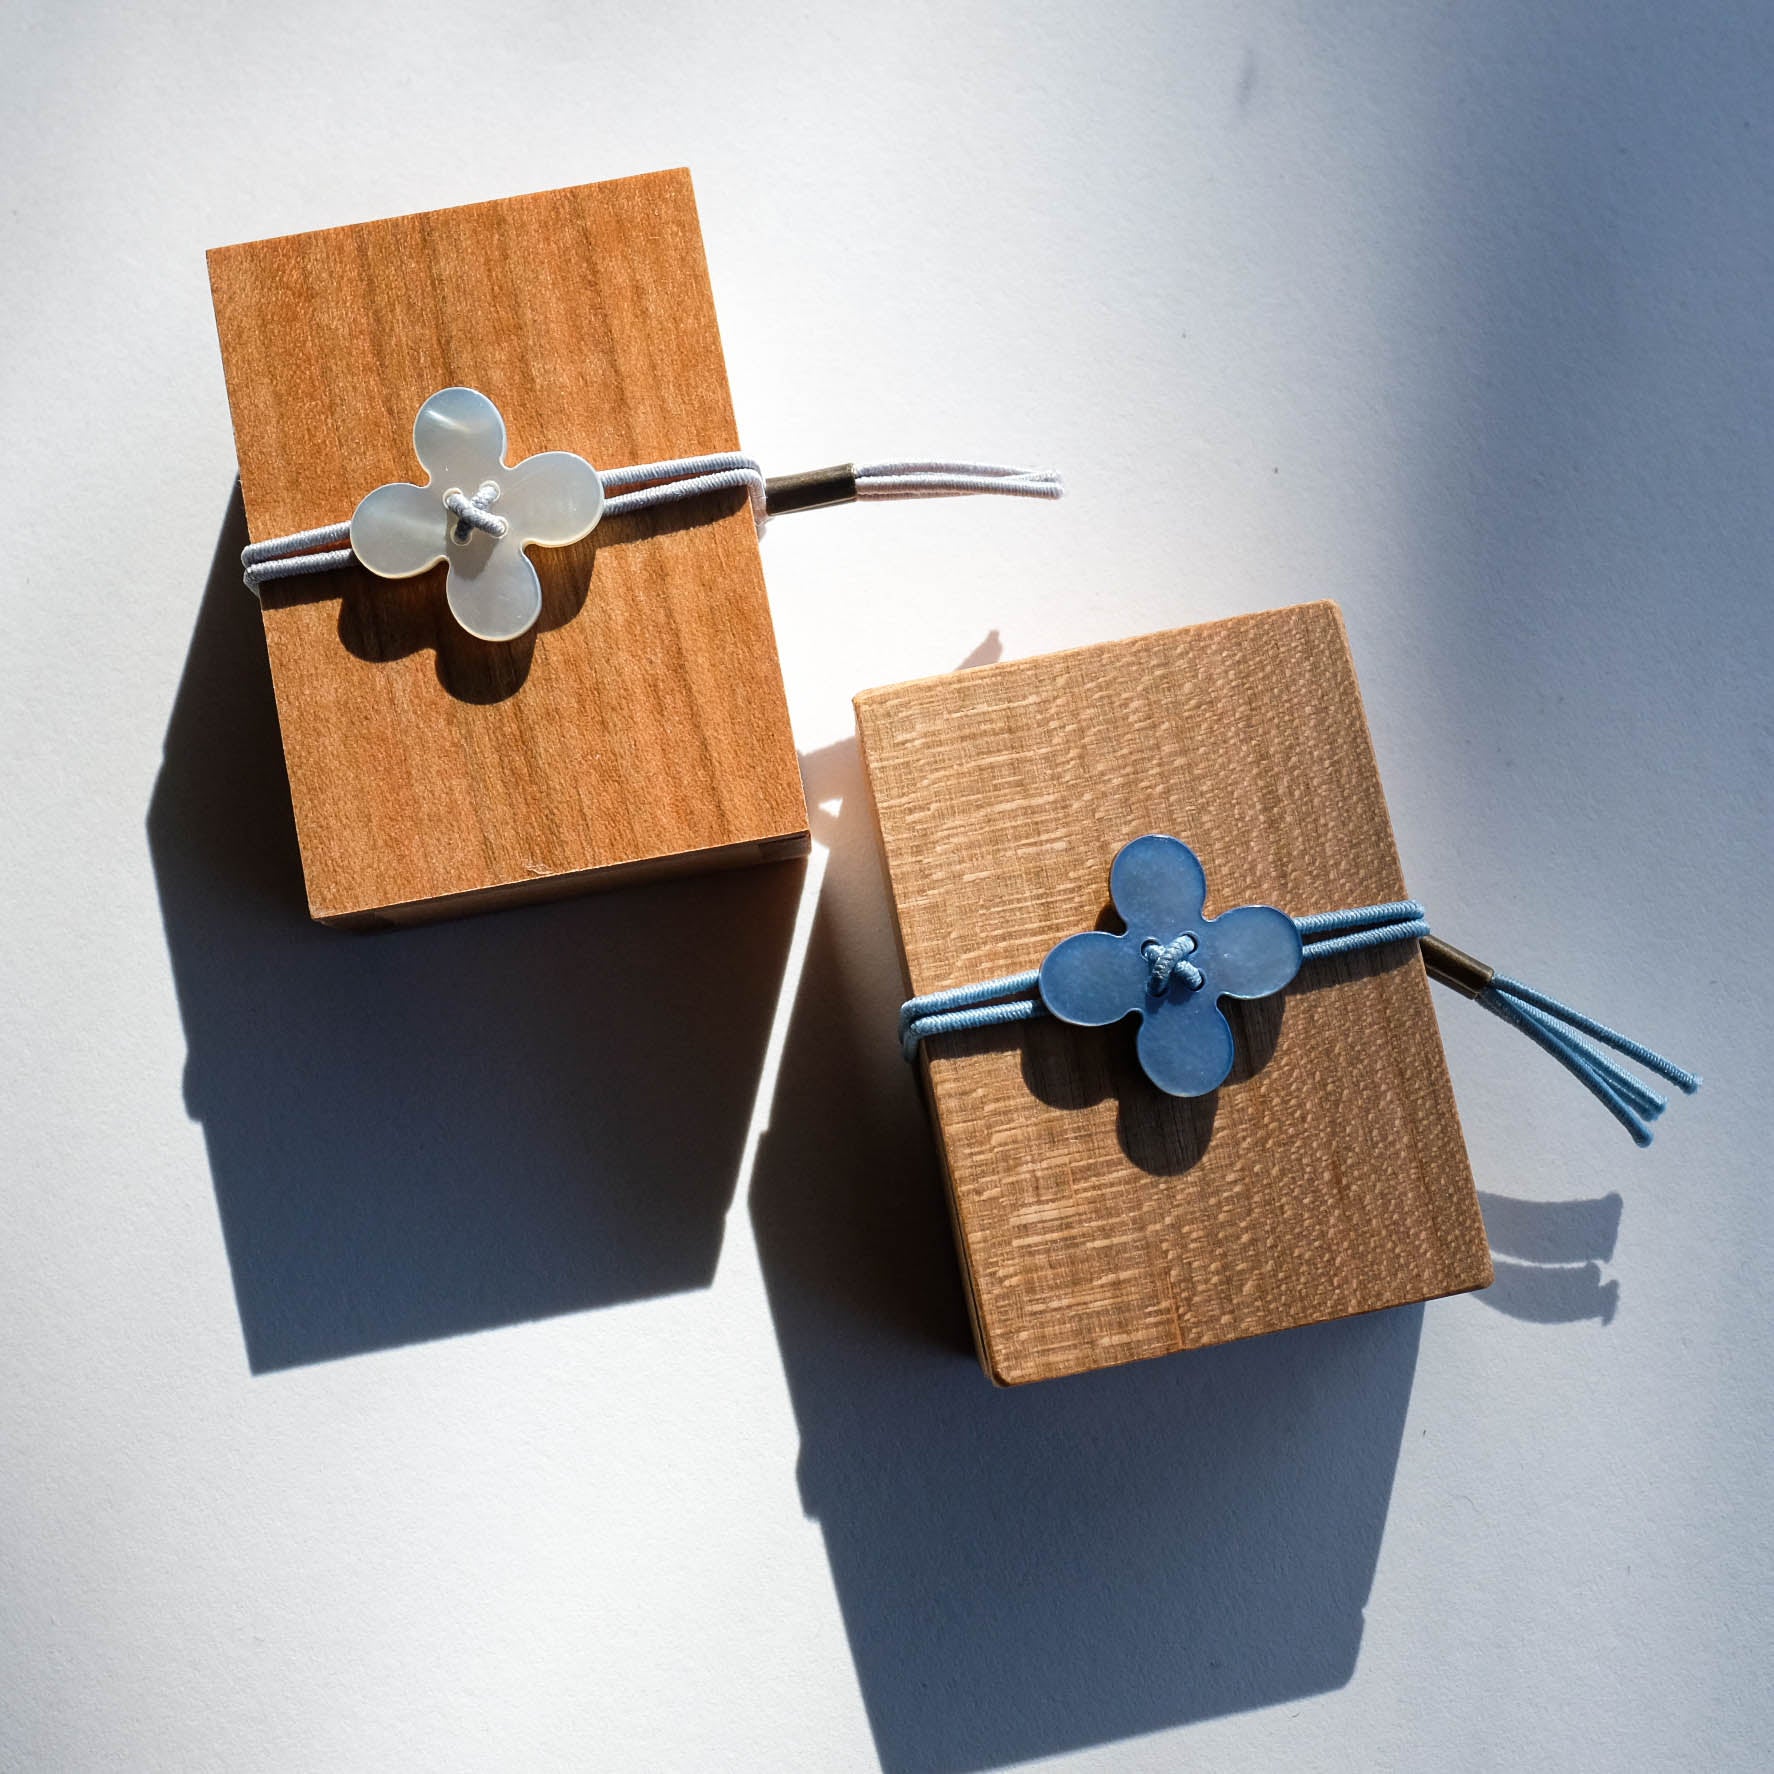 Glass Sewing Pins in a Cherry-wood Box